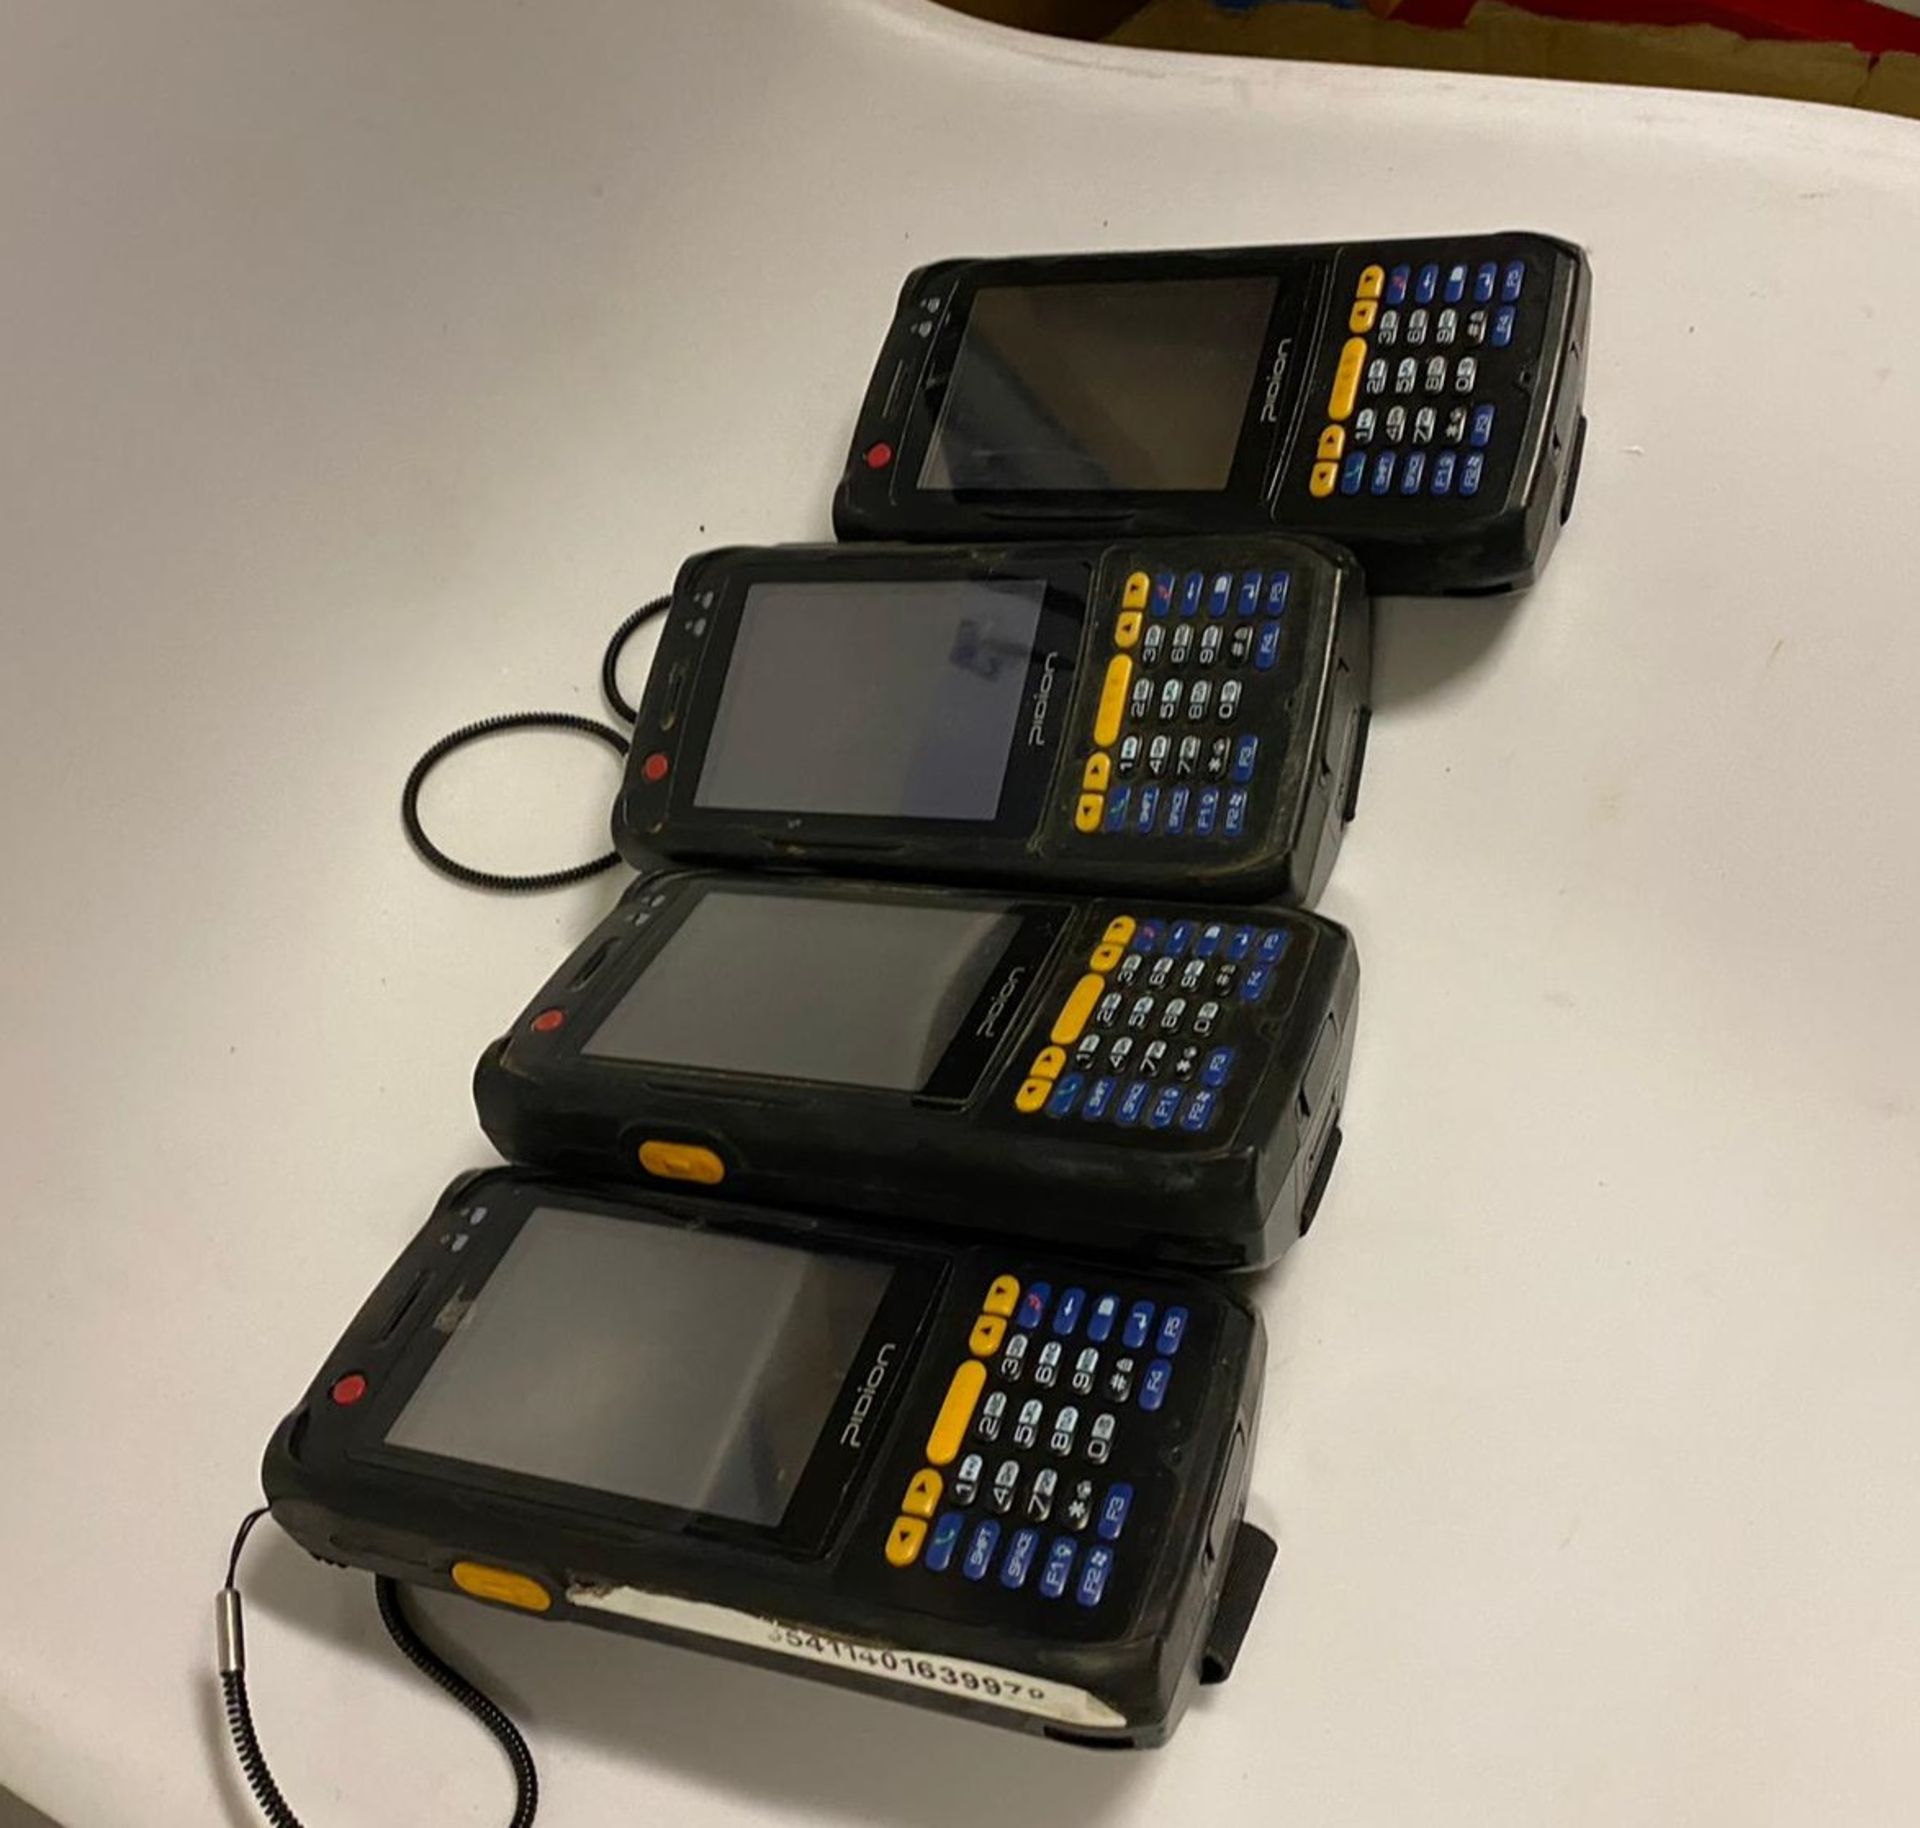 4 x Pidion BIP-6000 Mobile Handheld Computer With Barcode Scanning Capability - Used Condition - - Image 5 of 5